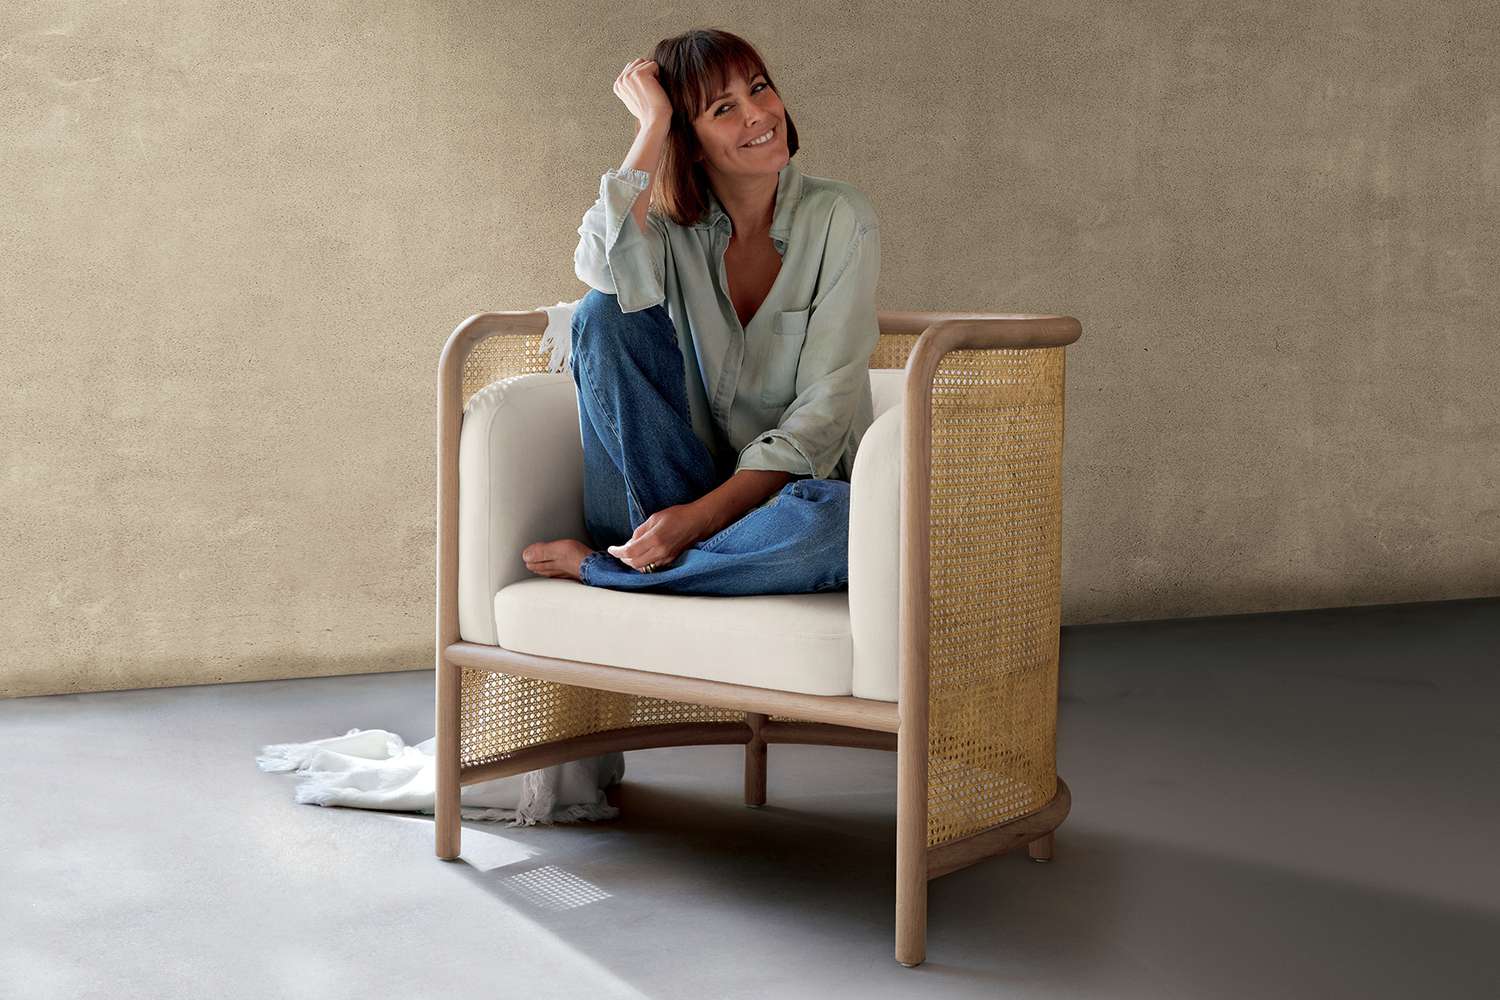 Leanne Ford Crate & Barrel Collection, Leanne on cane chair